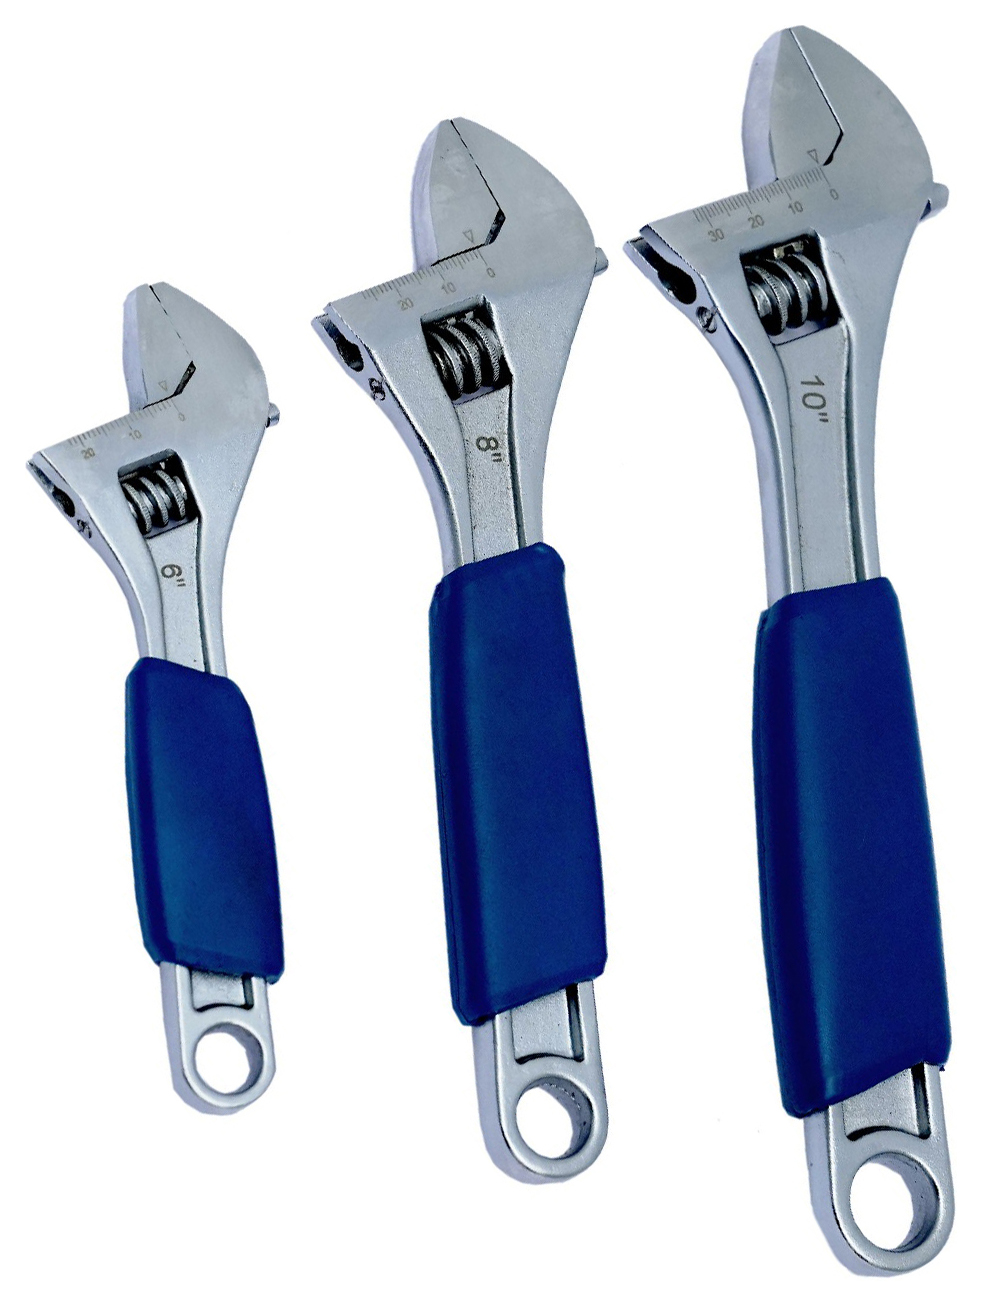 Image of Wickes Adjustable Drop Forged Steel 3 Piece Wrench Set with Grips